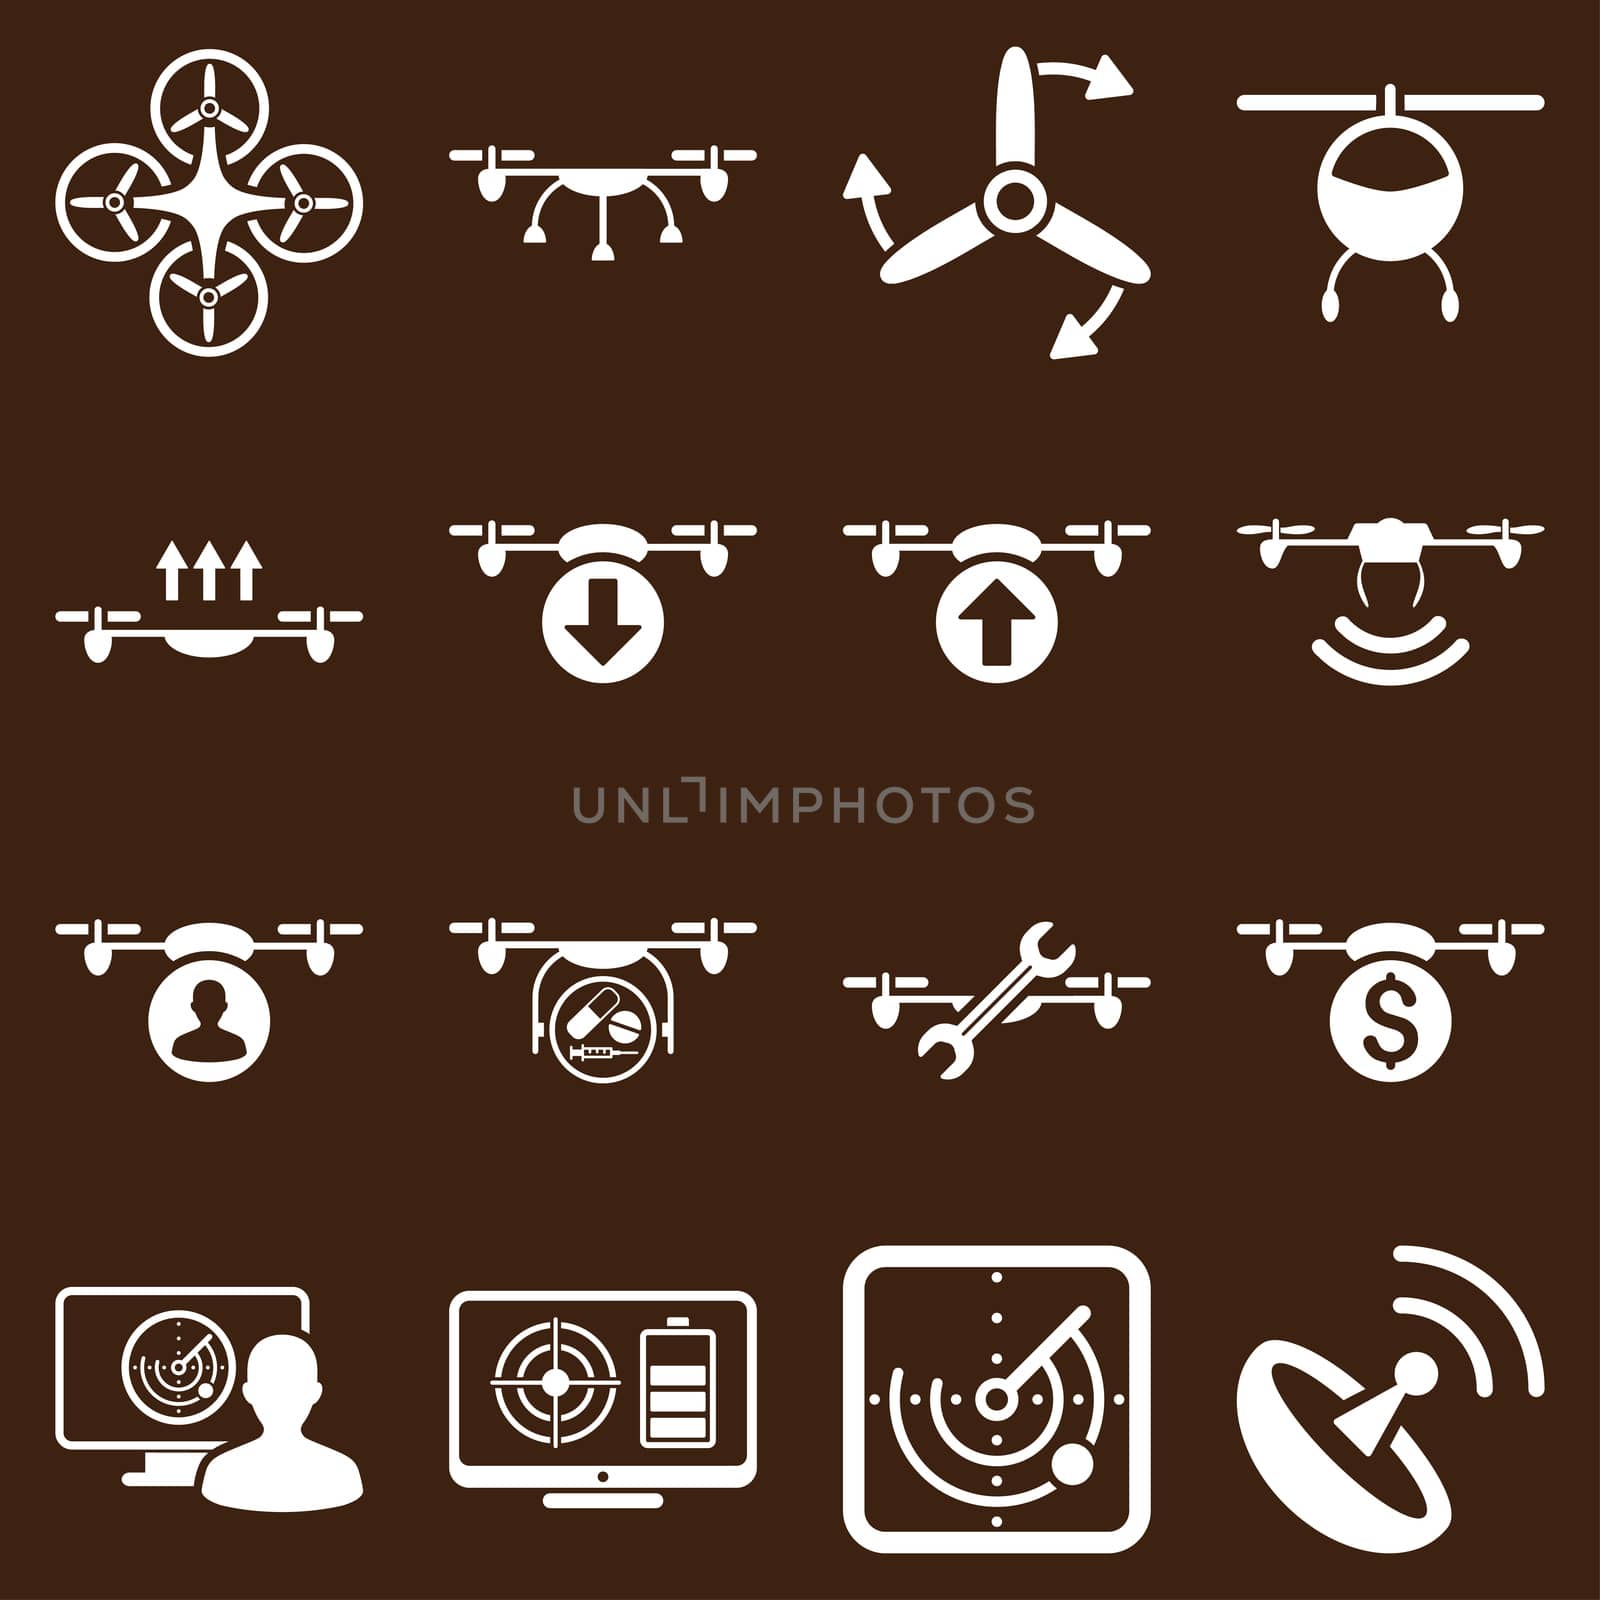 Quadcopter service icon set designed with white color. These flat pictograms are isolated on a brown background.